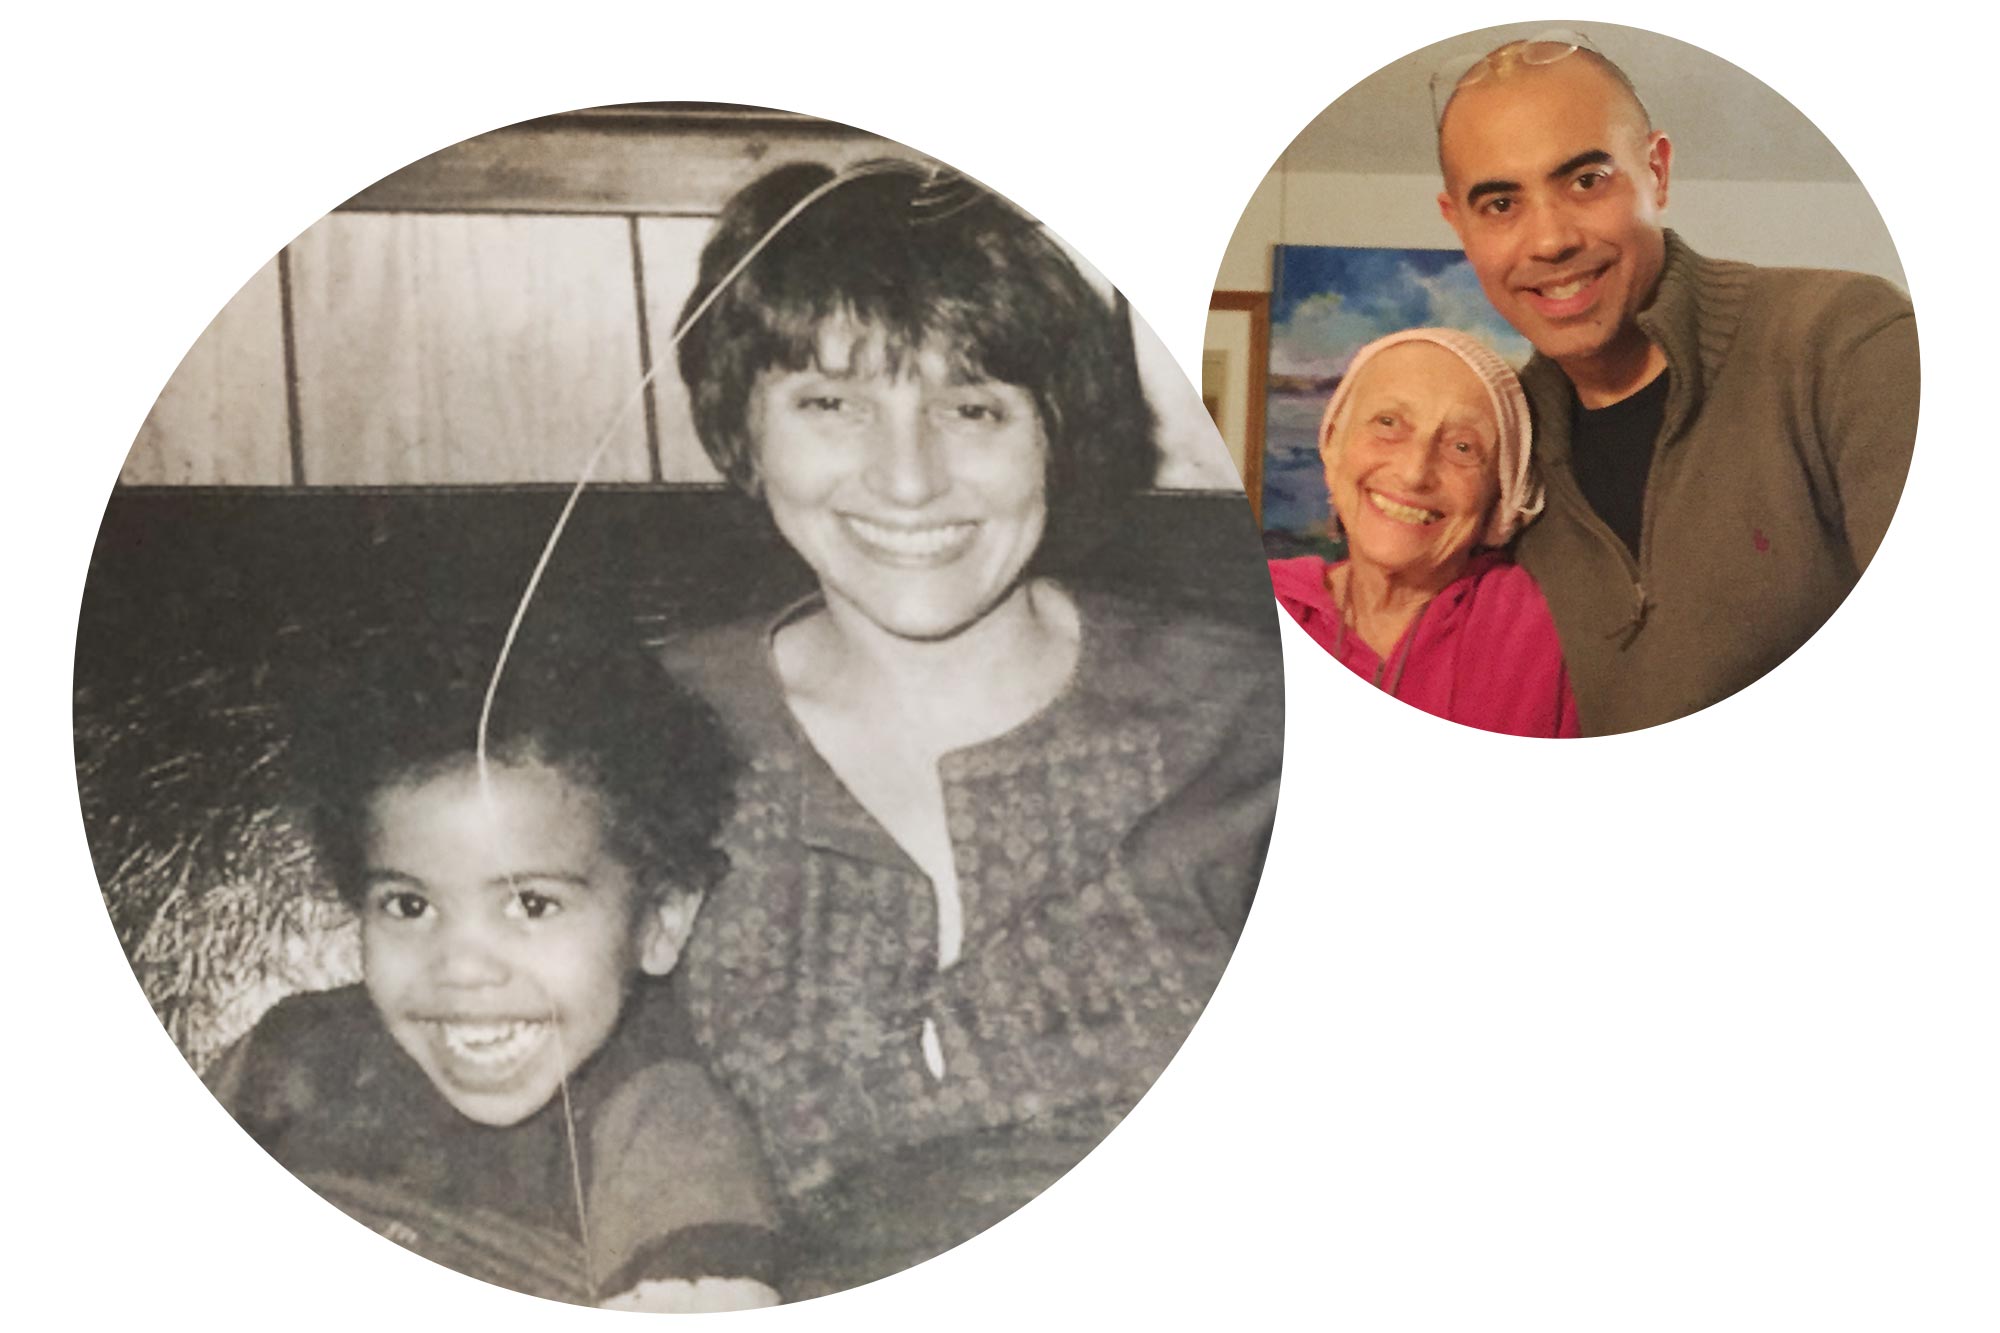 A black and white photo of Solomon as a child with his mother, and a modern photo of the two